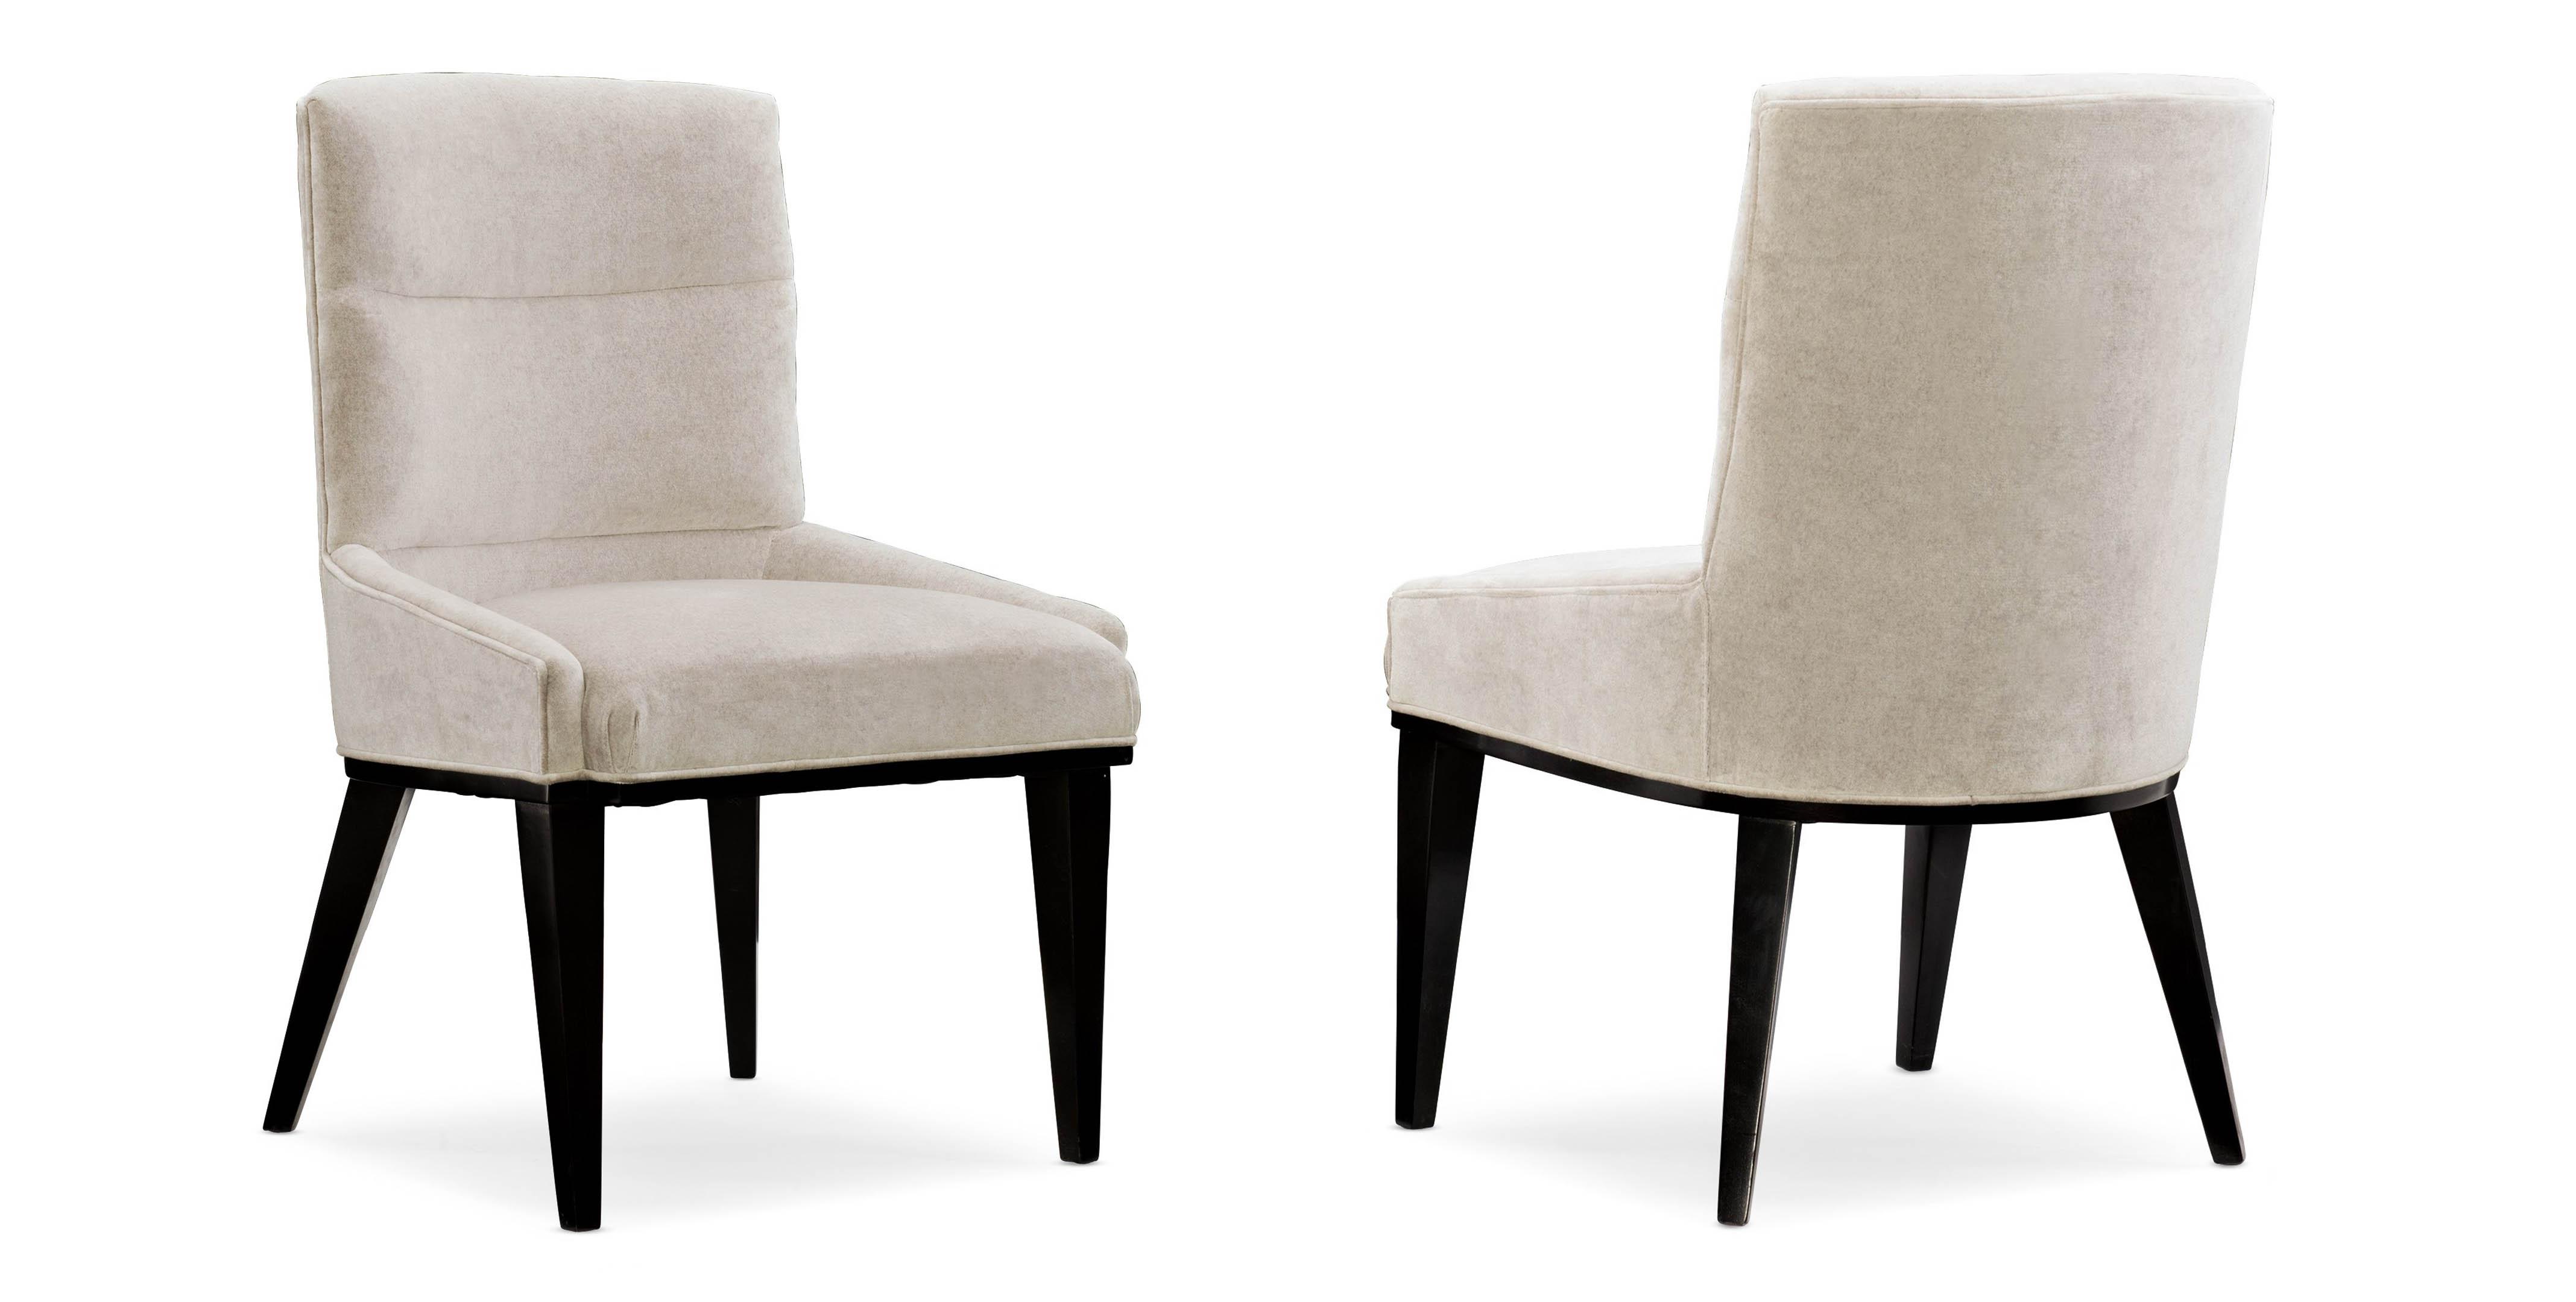 Contemporary Dining Chair Set VECTOR DINING CHAIR M102-419-272-Set-2 in Off-White, Ebony Fabric